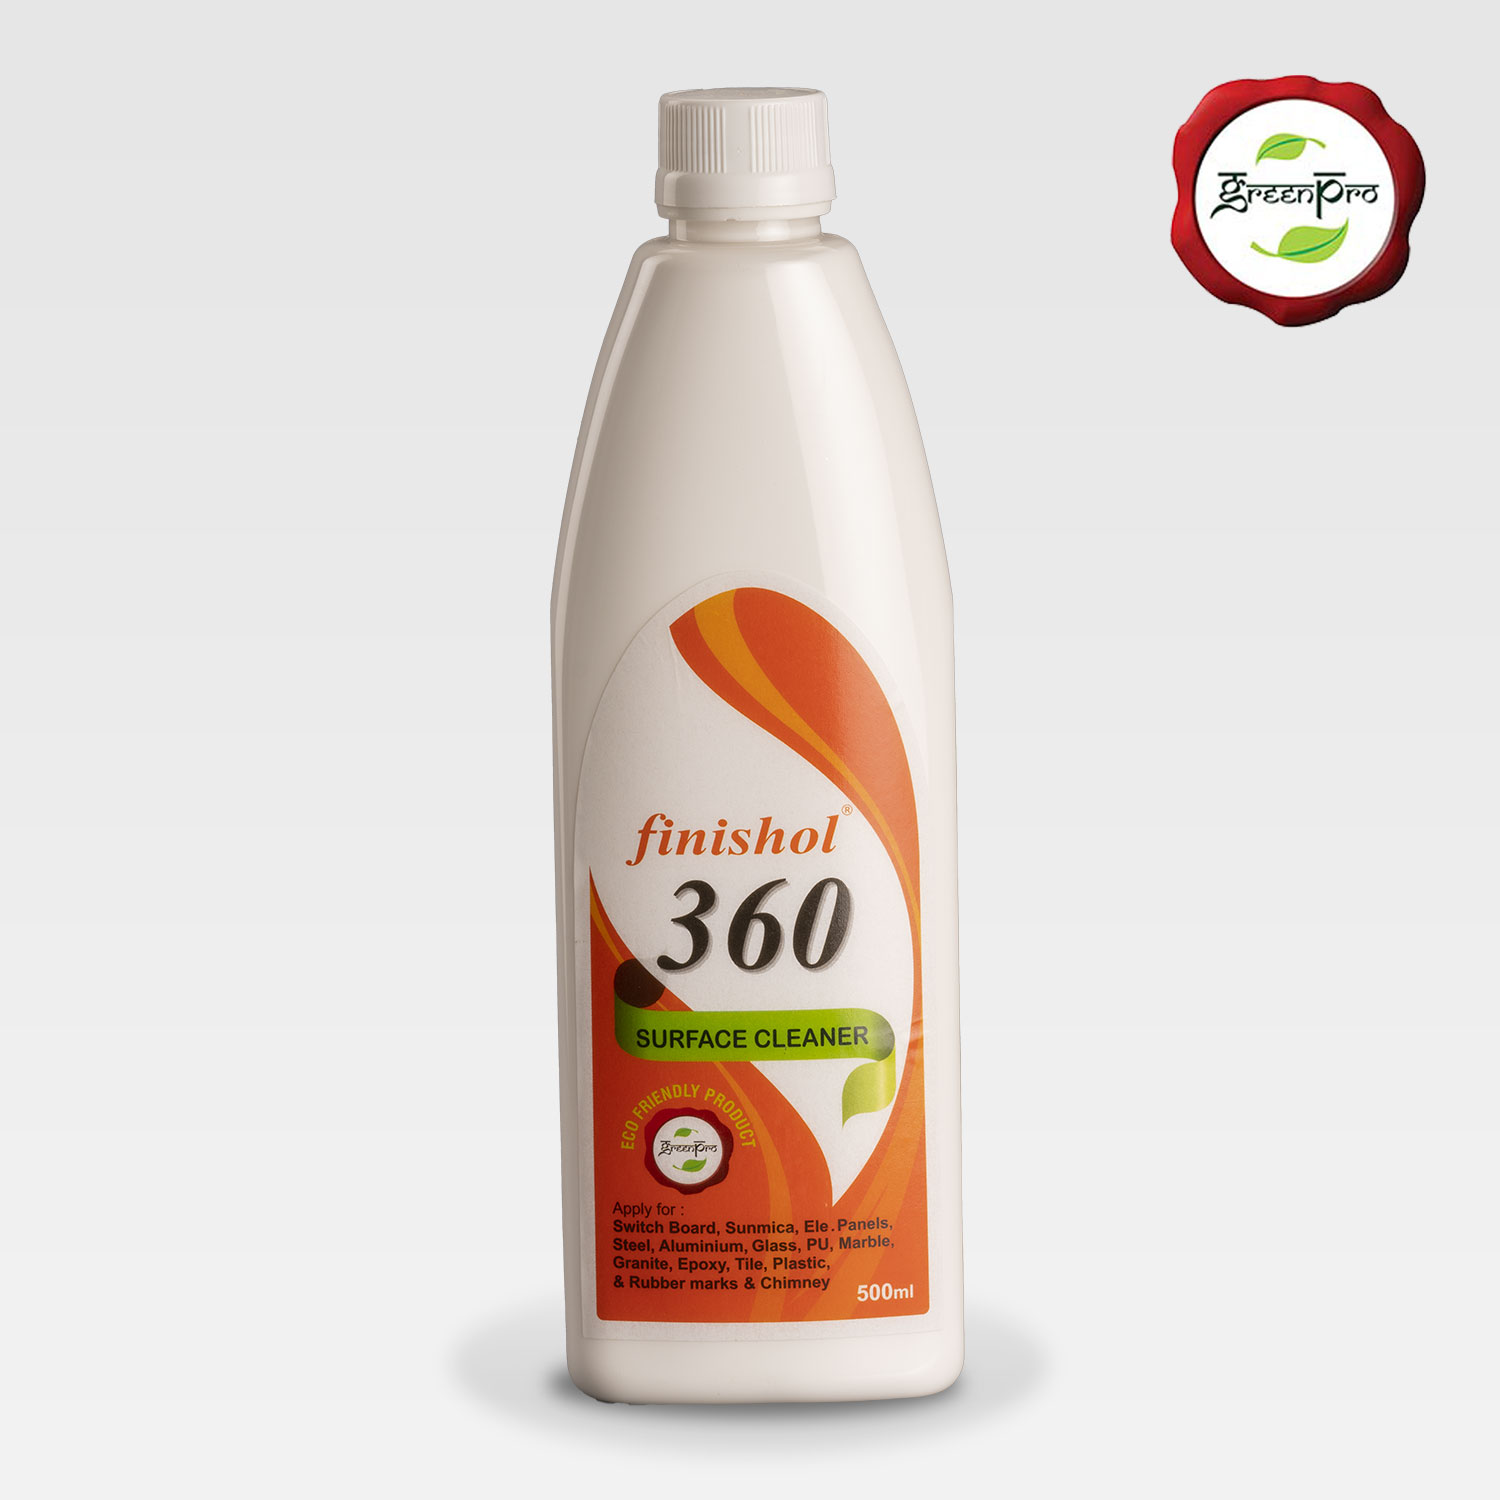 Eco-friendly Surface Cleaner - Finishol 360